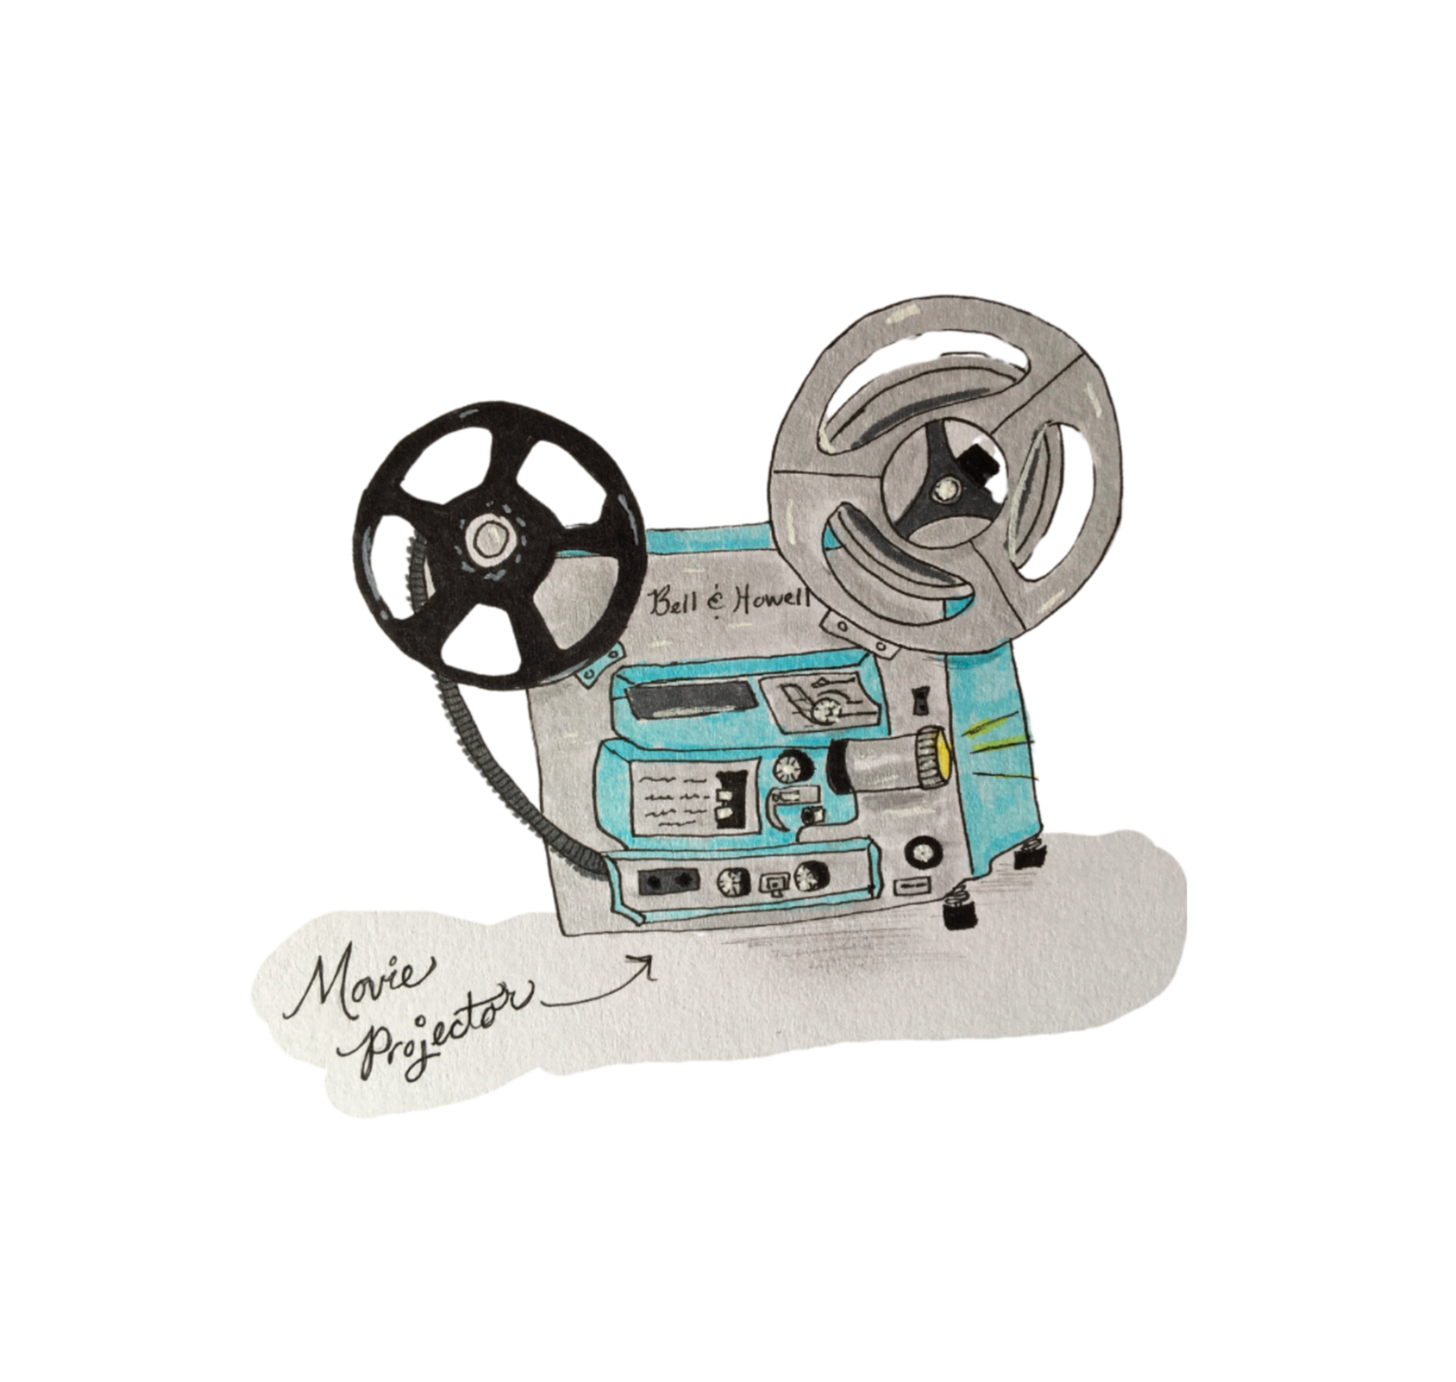 Illustration of a 1980’s movie projector. It has two big wheels attached to a machine with a lens that you put the movie reels onto and it plays the pictures onto the screen. The machine in this illustration is gray and light blue